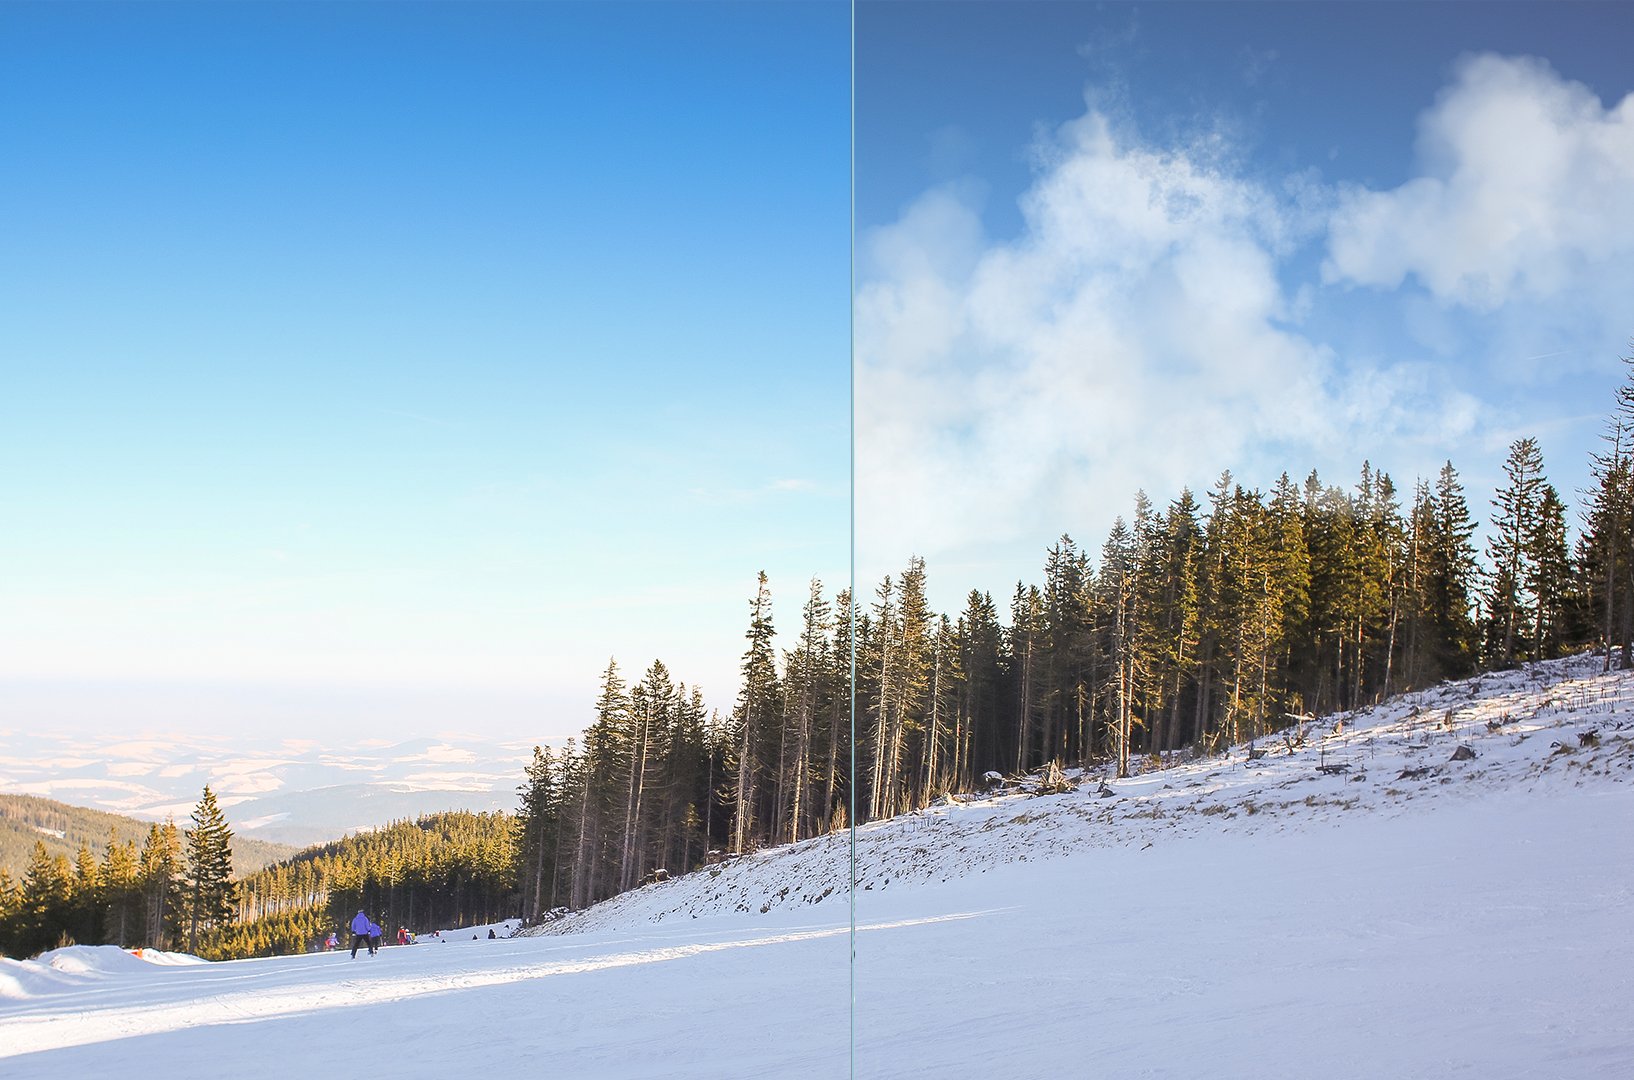 photoshop cloud painting sk slope 286